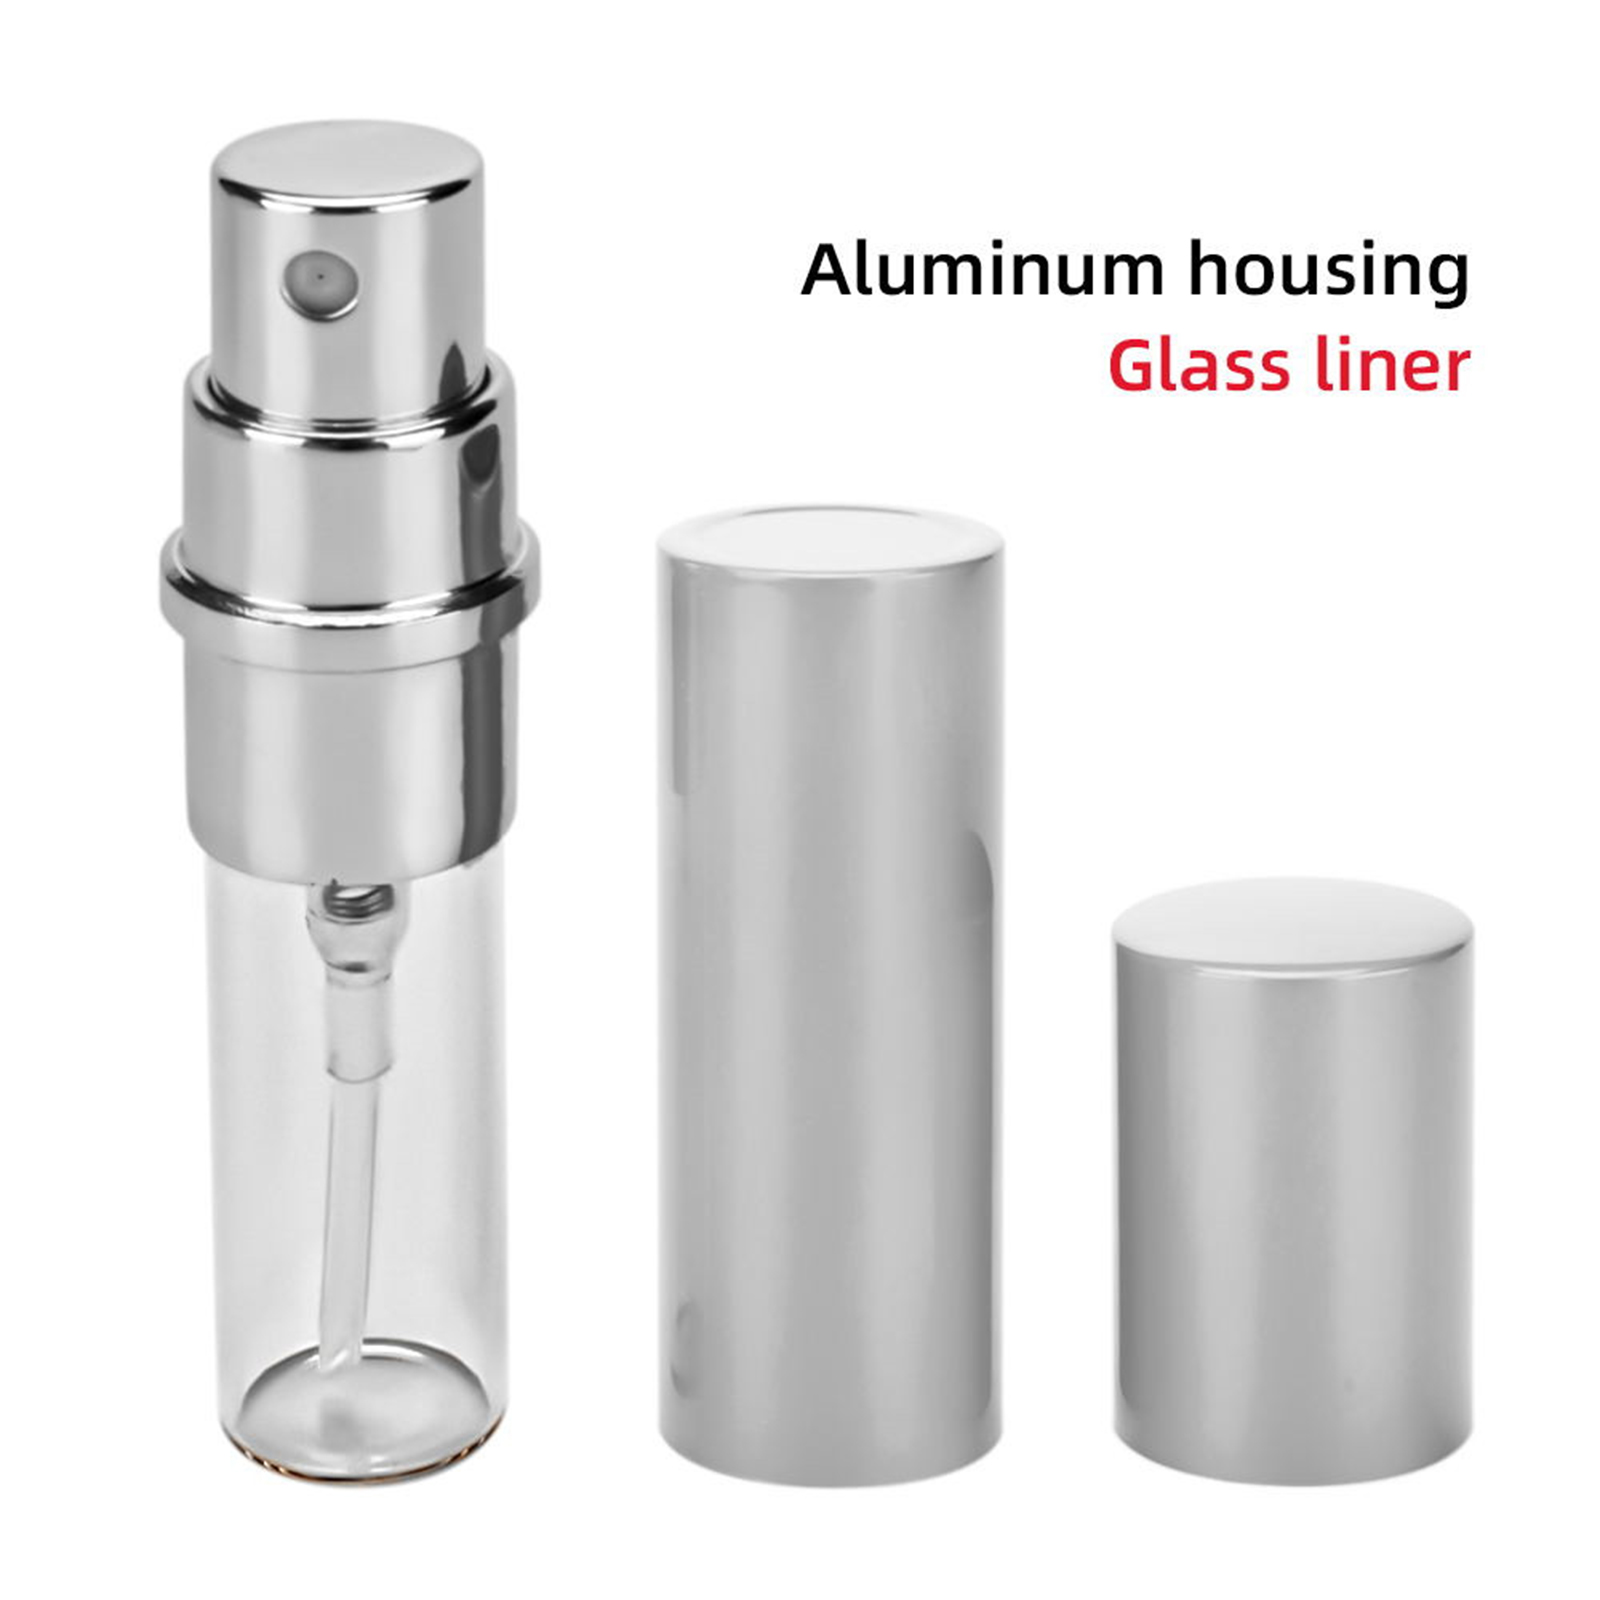 5PCS 10ml Refillable Mini Perfume Bottle Portable Aluminum Atomizer Perfume Spray Bottle Cosmetic Container for Travel - image 4 of 7